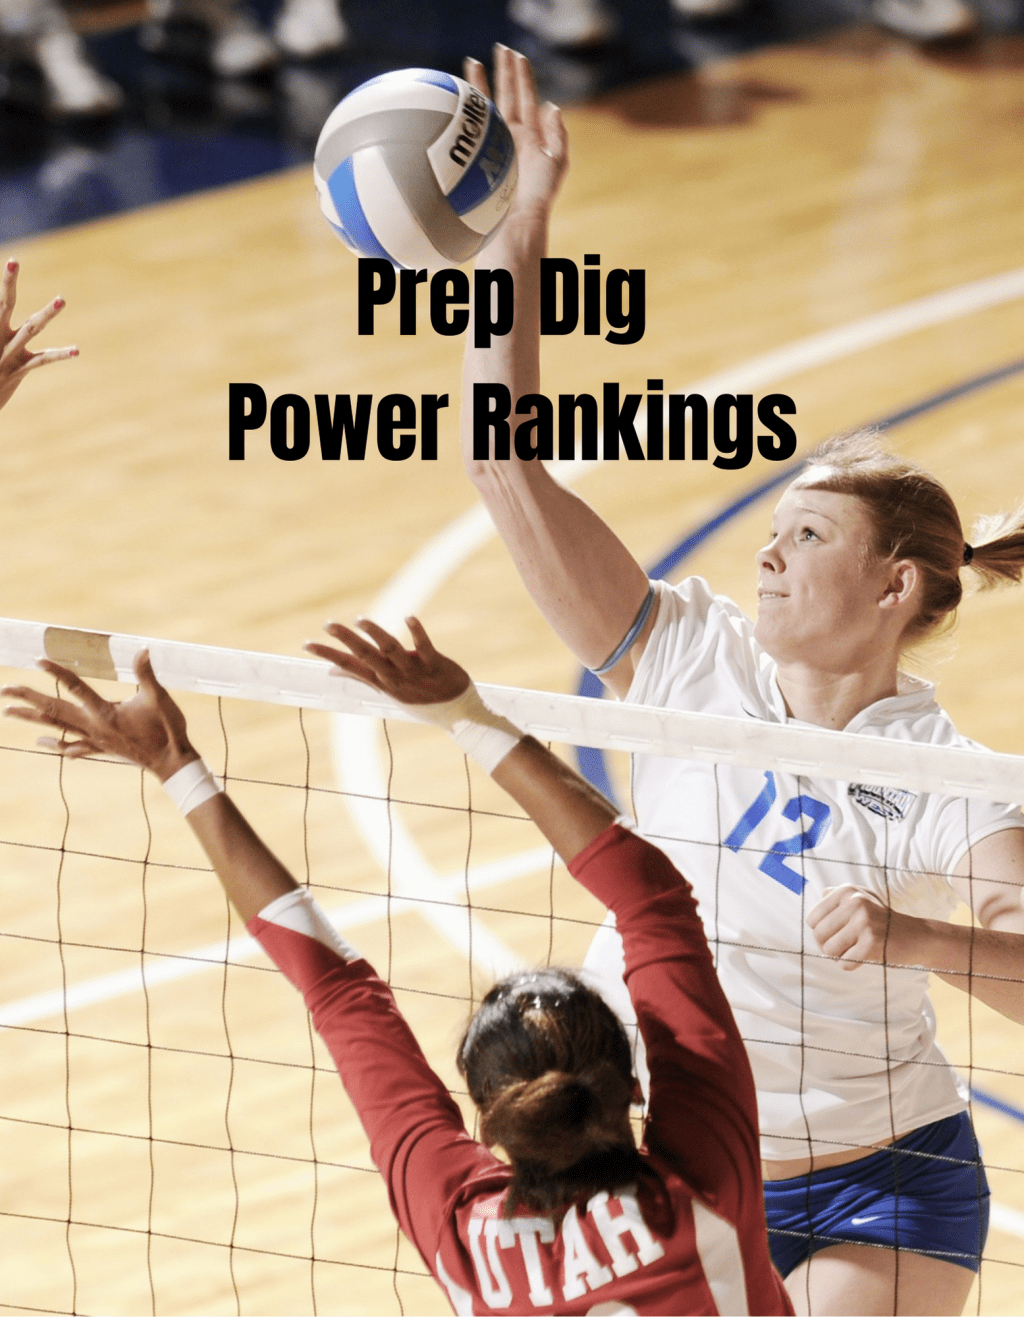 Prep Dig Power Rankings: New Teams Enter the Fray